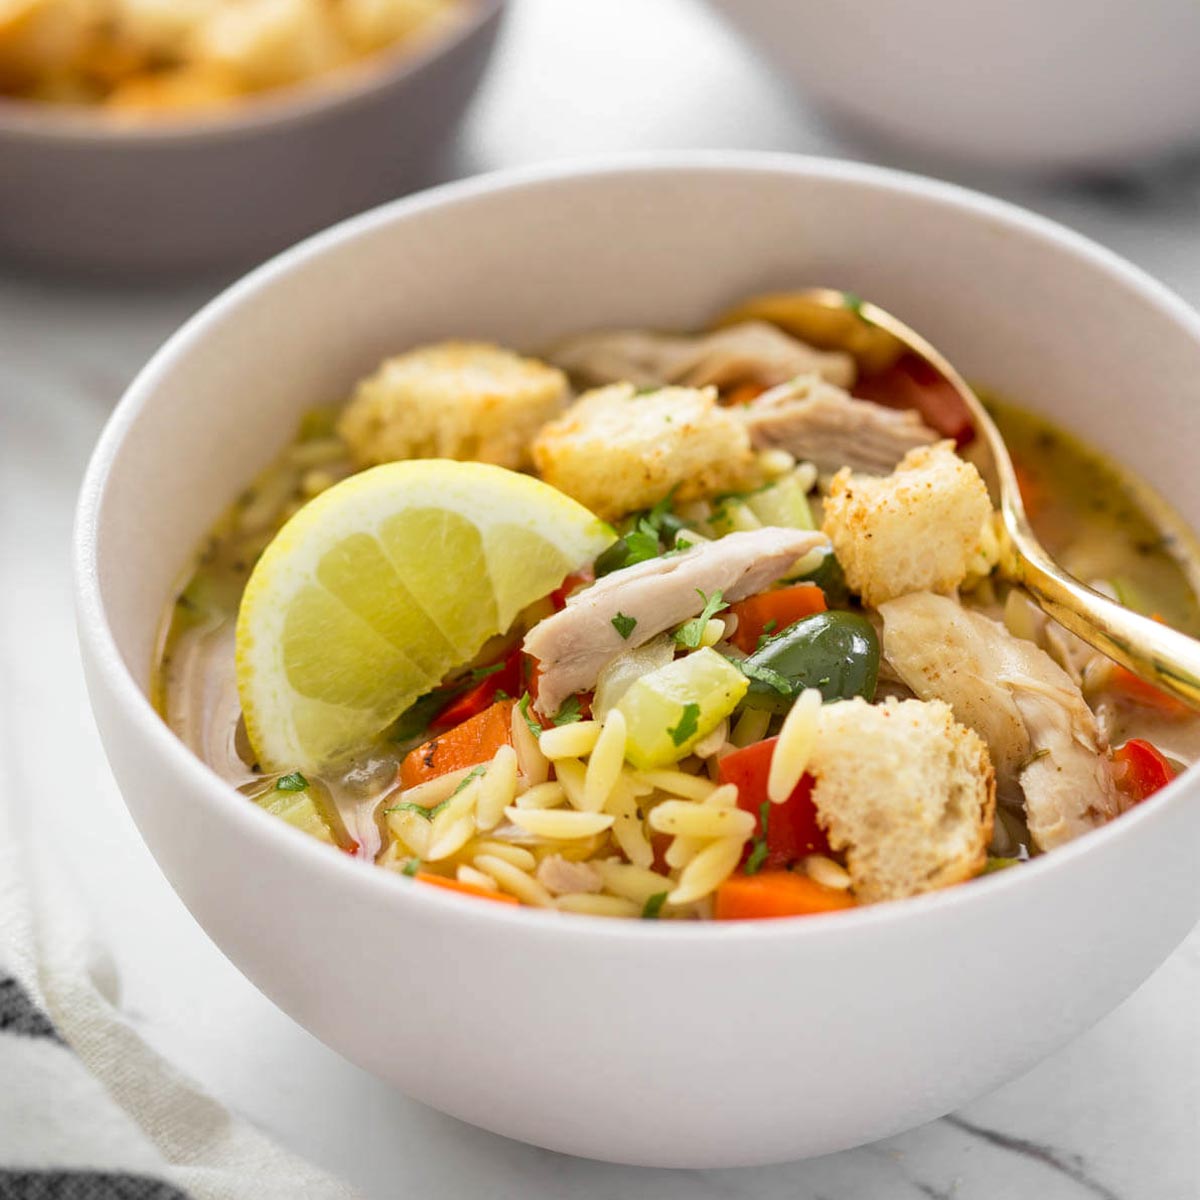 Healthy lemon chicken soup with orzo in a serving bowl with some croutons on the side.